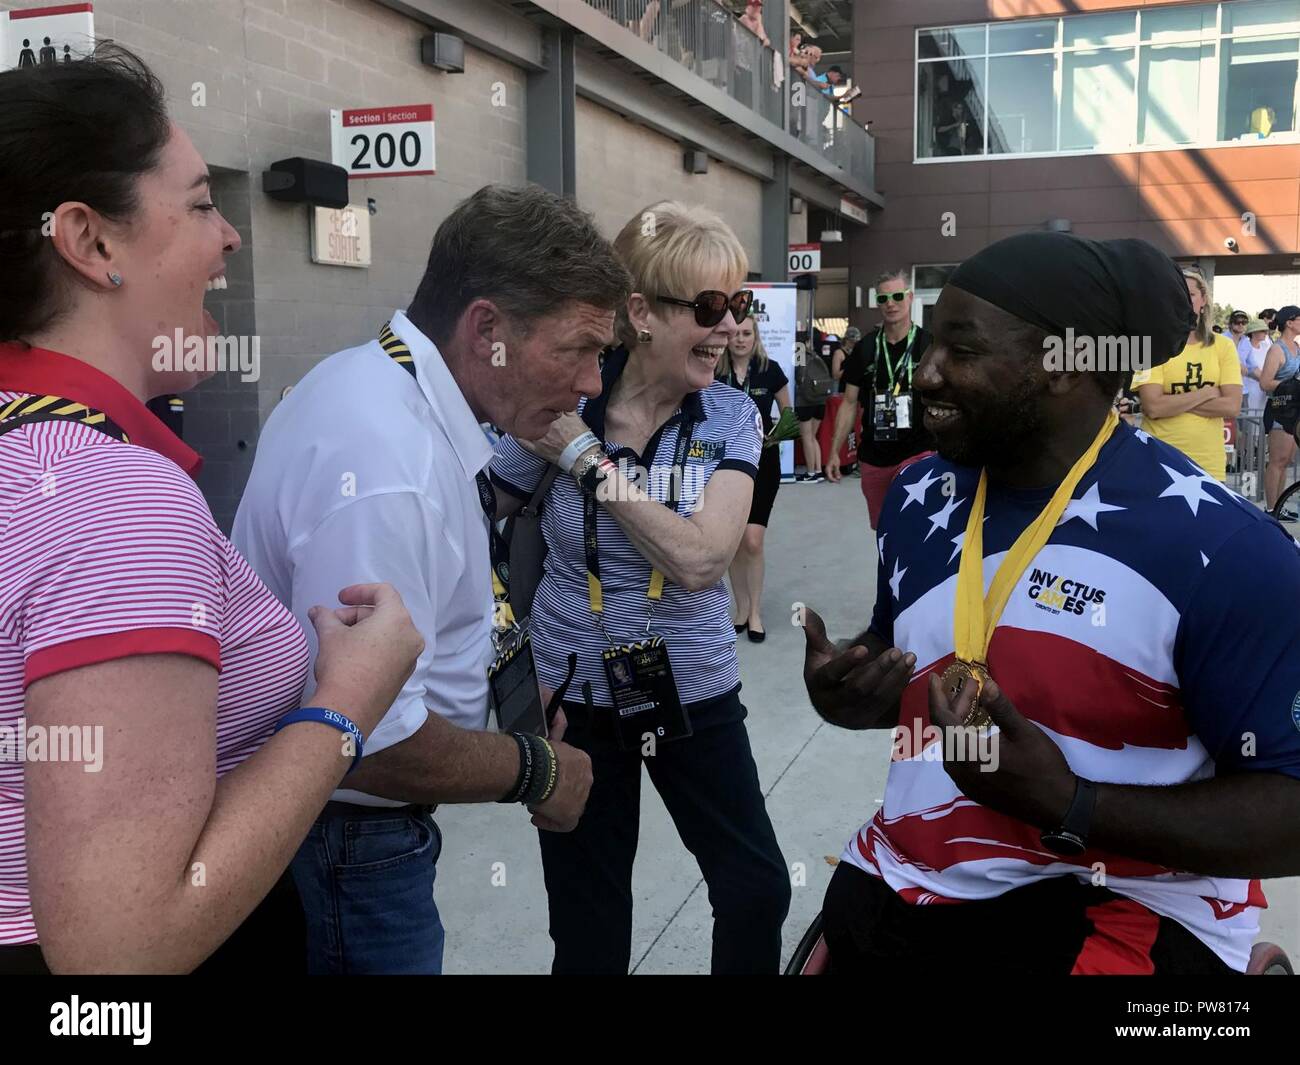 Ken Fisher, CEO and founder of Fisher House, jokes with medically retired Army Spc. Tony Pone, after he earned gold medals in his disability category in the men’s discus and shot put during the 2017 Invictus Games in Toronto Sept. 24, 2017. The Invictus Games, established by Prince Harry in 2014, brings together wounded and injured veterans from 17 nations for 12 adaptive sporting events, including track and field, wheelchair basketball, wheelchair rugby, swimming, sitting volleyball, and new to the 2017 games, golf. Stock Photo